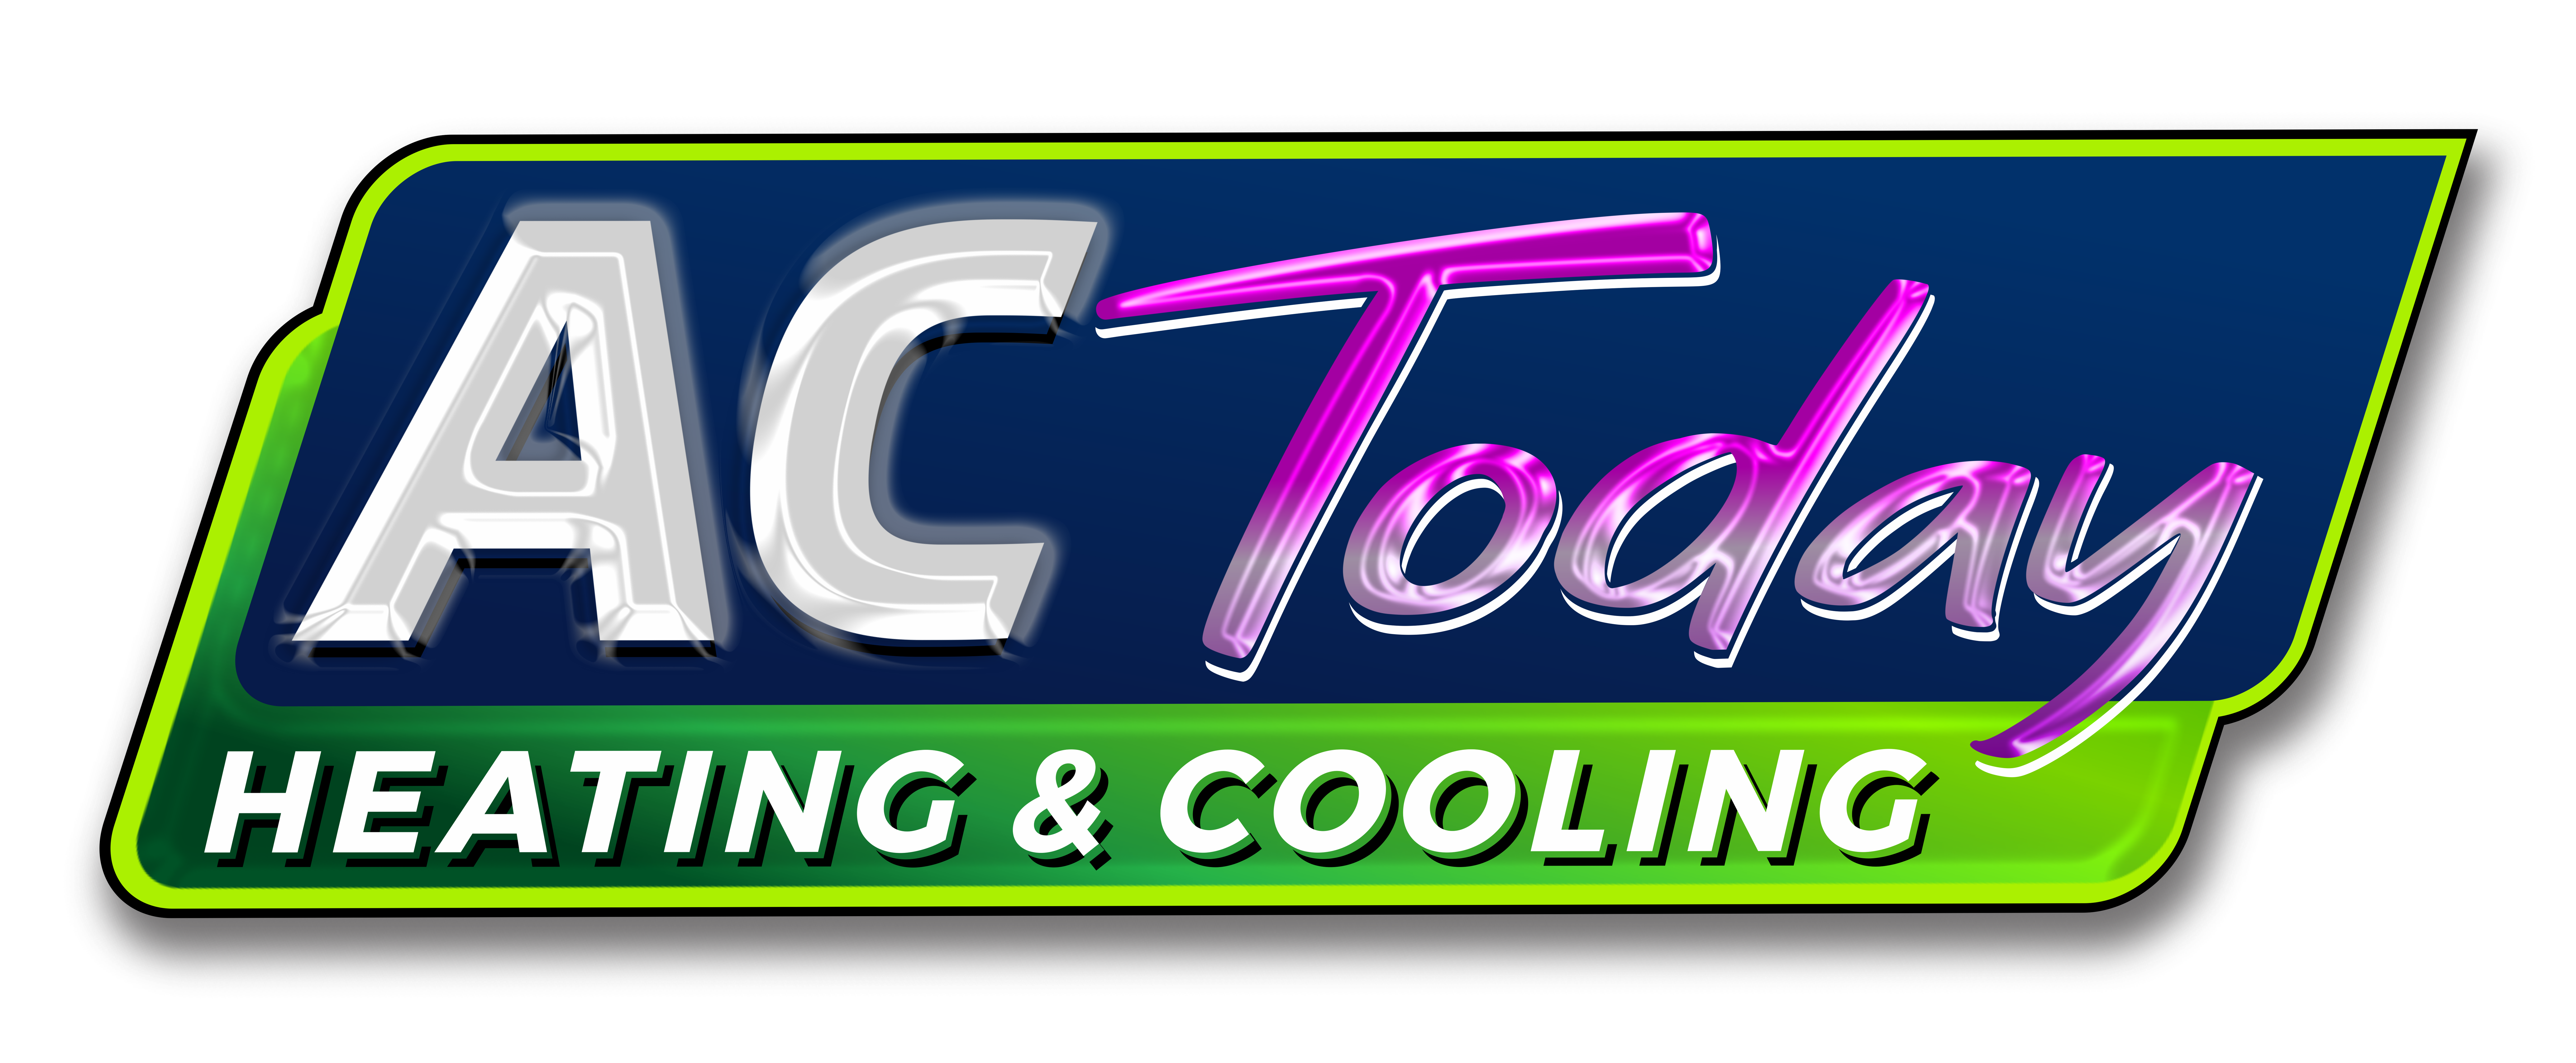 AC Today Heating & Cooling Logo